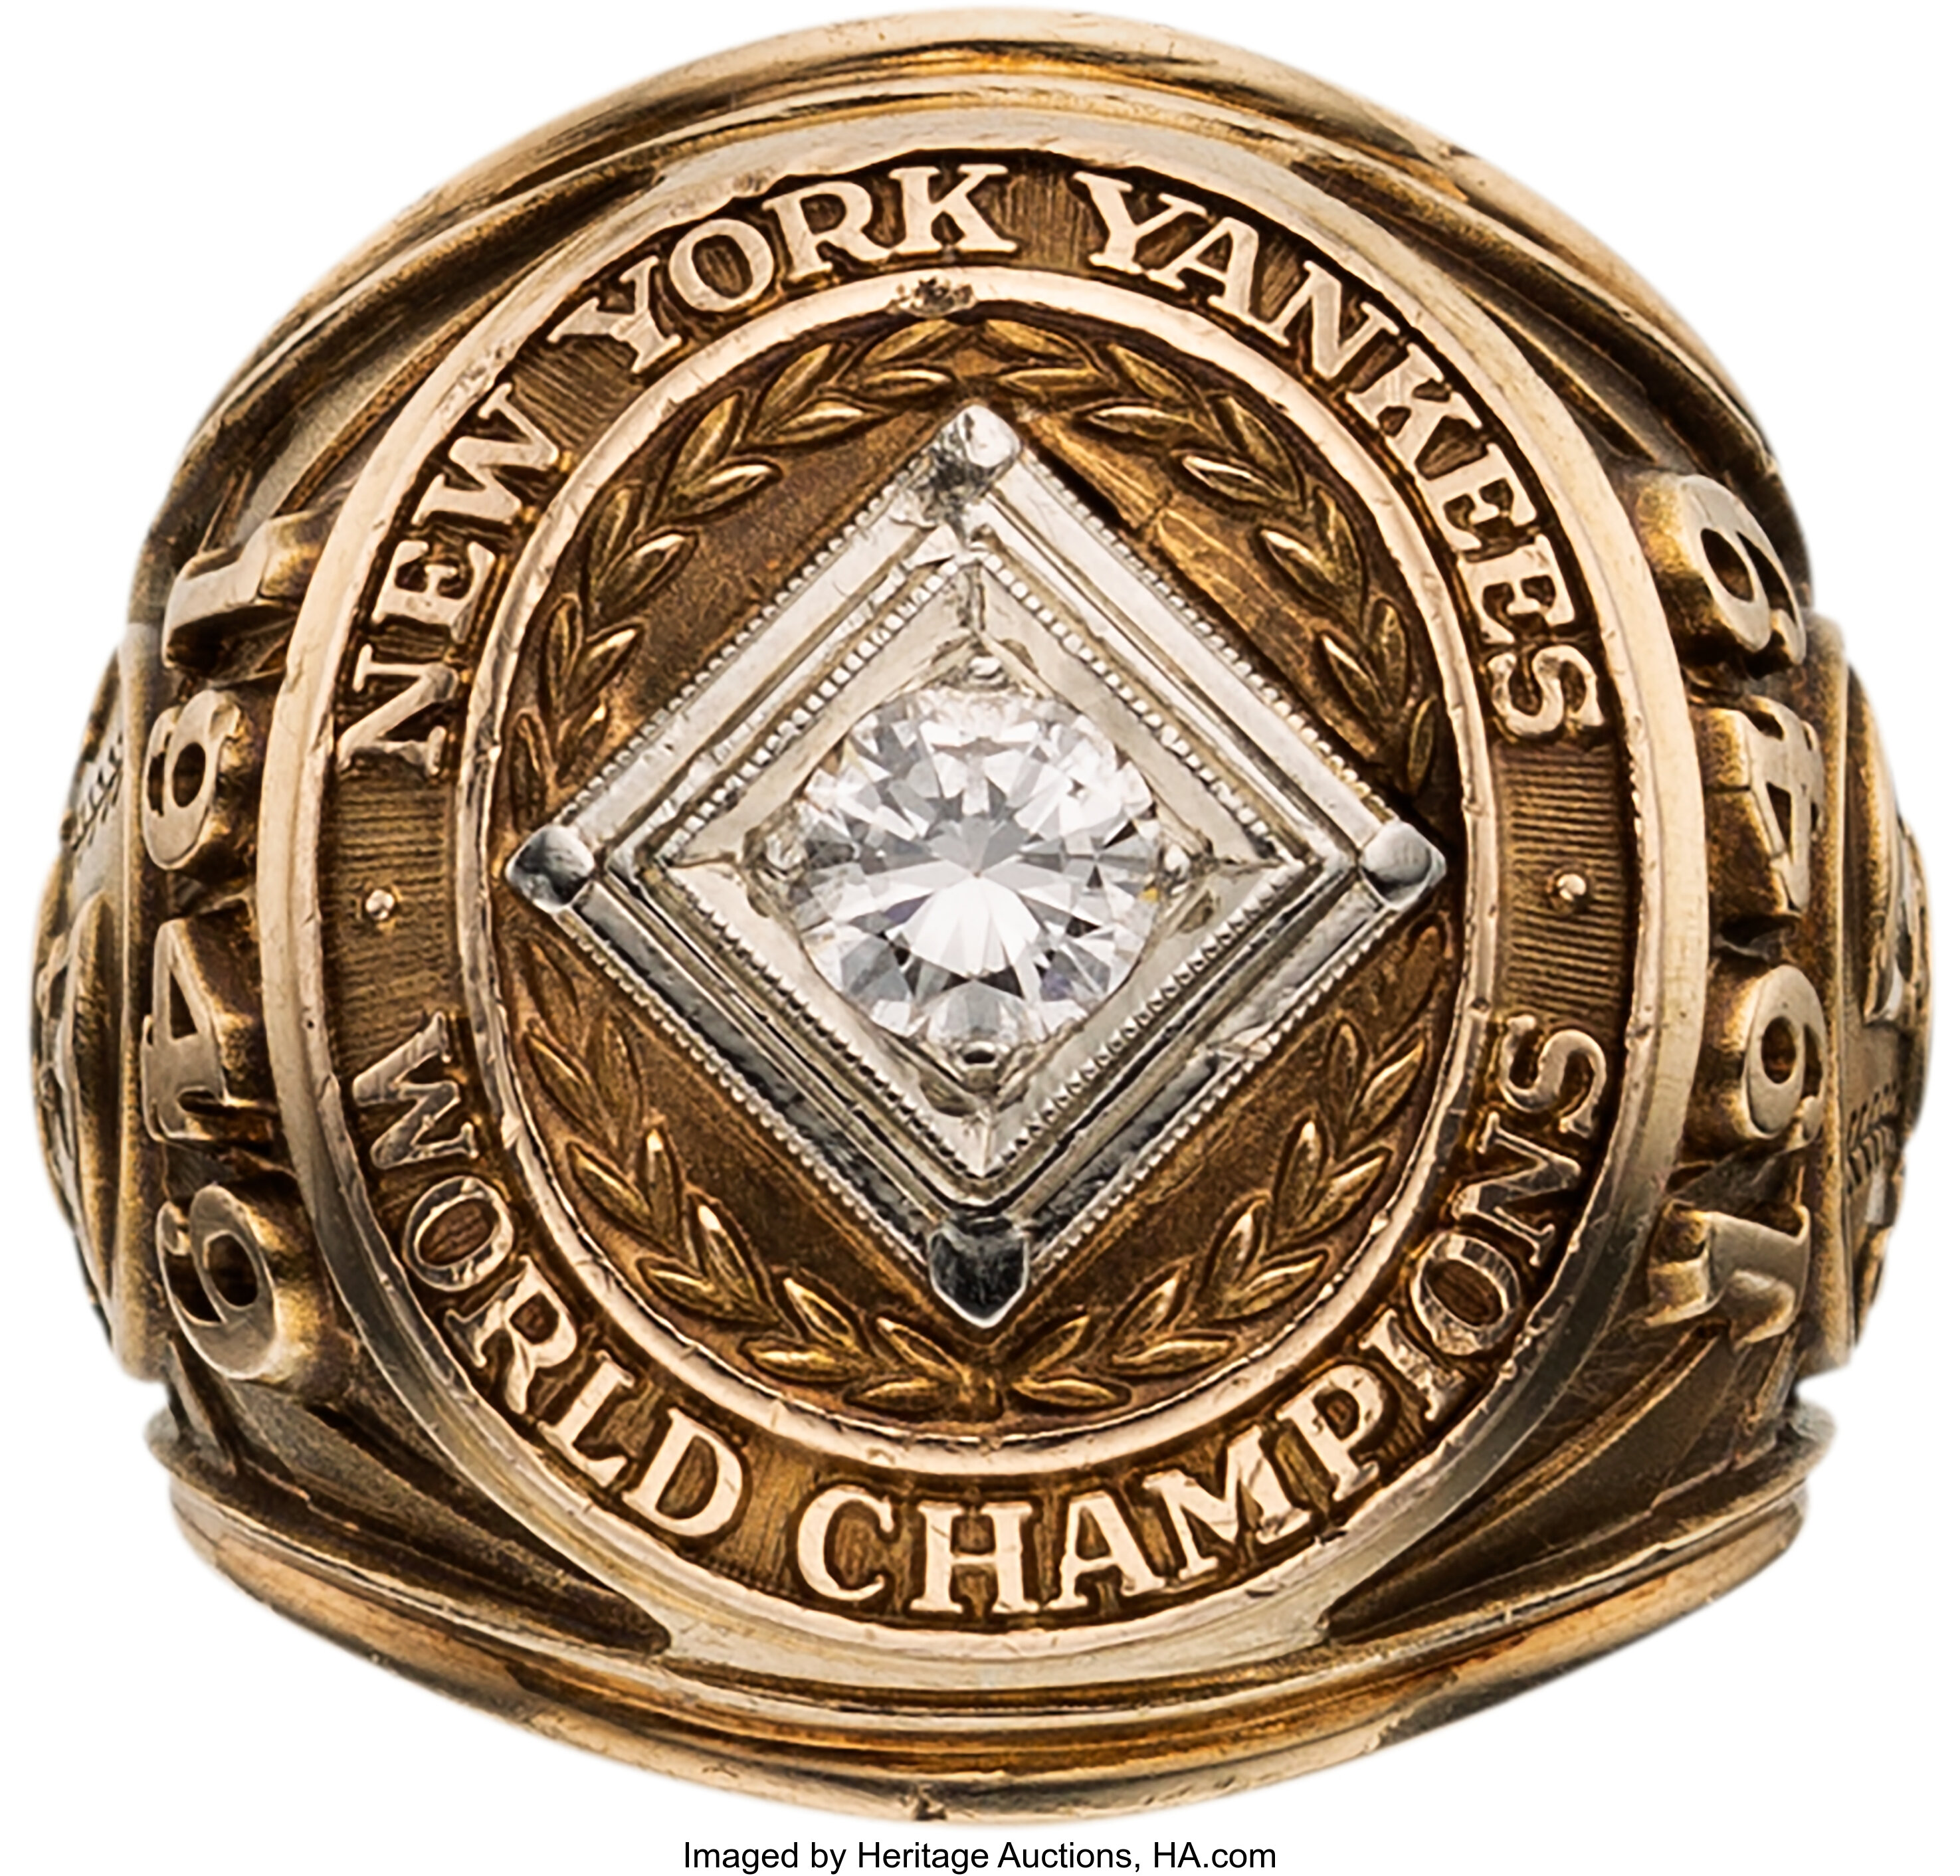 1956 New York Yankees World Series Ring Auction Sells at $19,000